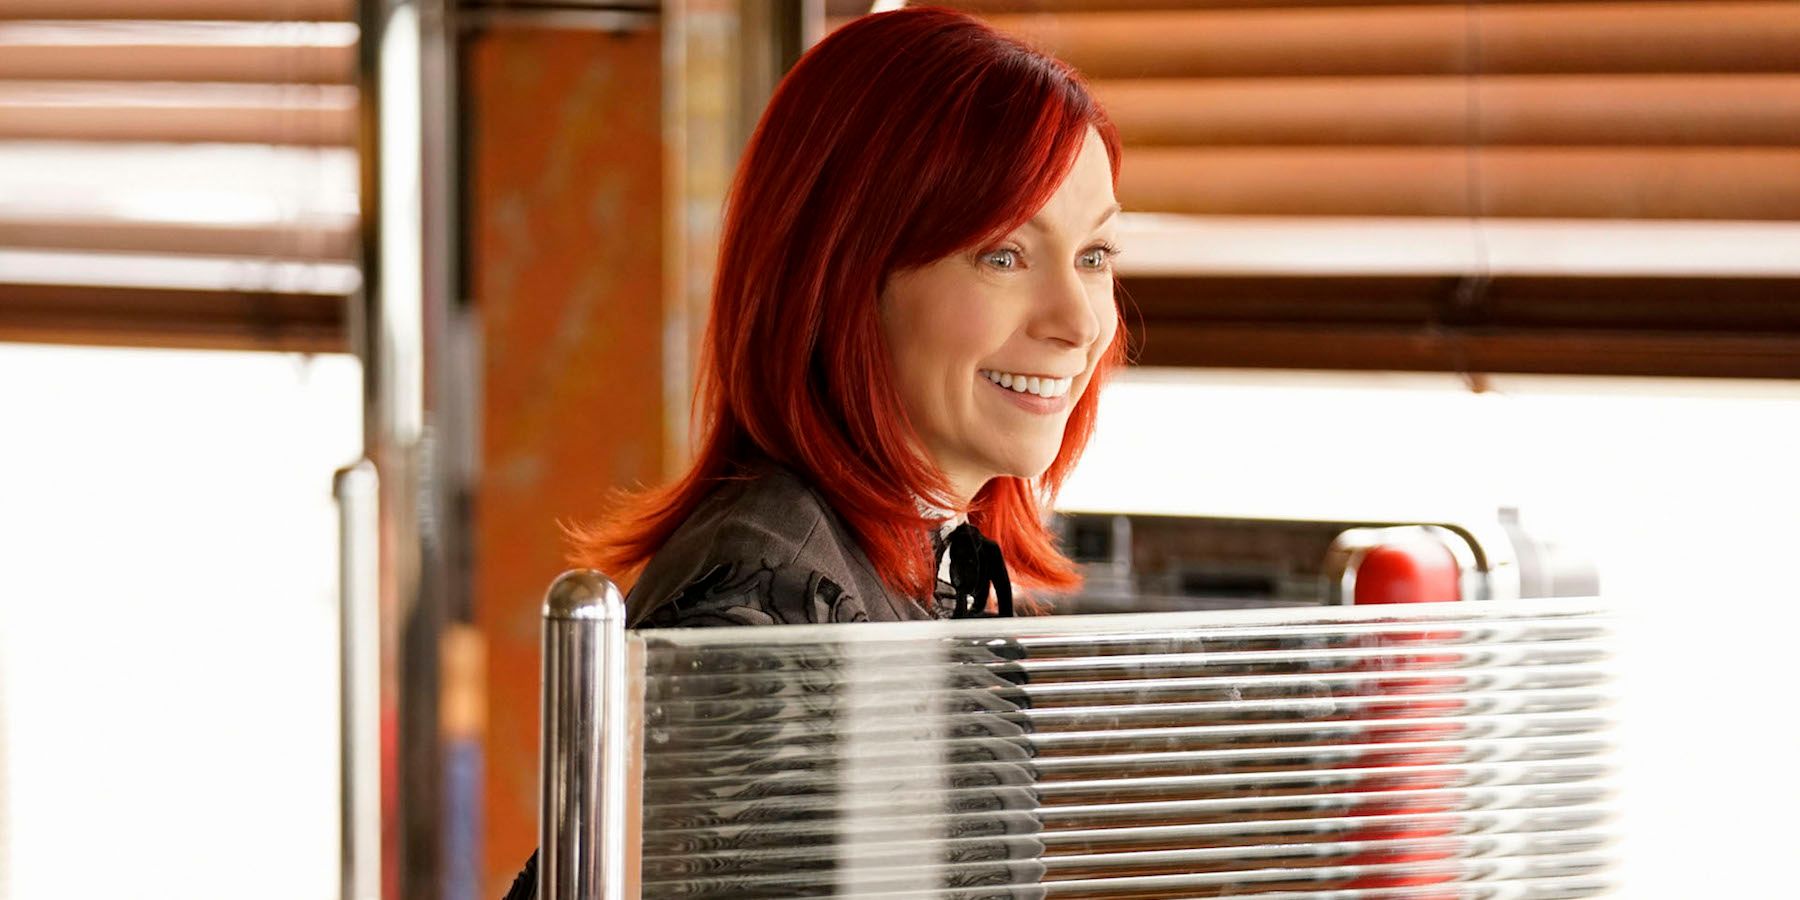 Carrie Preston as Elsbeth smiling in The Good Fight